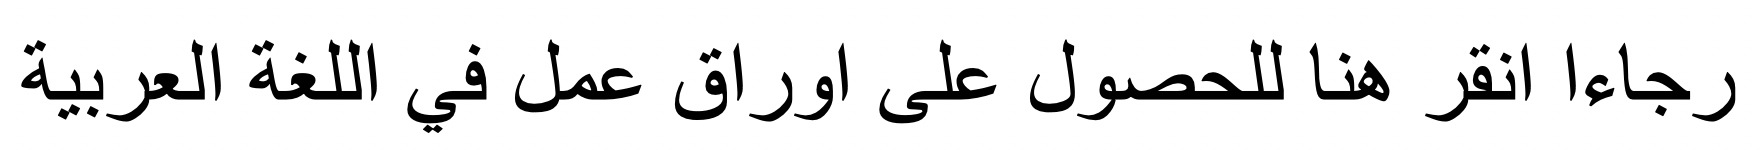 Please click here for worsksheets available in Arabic